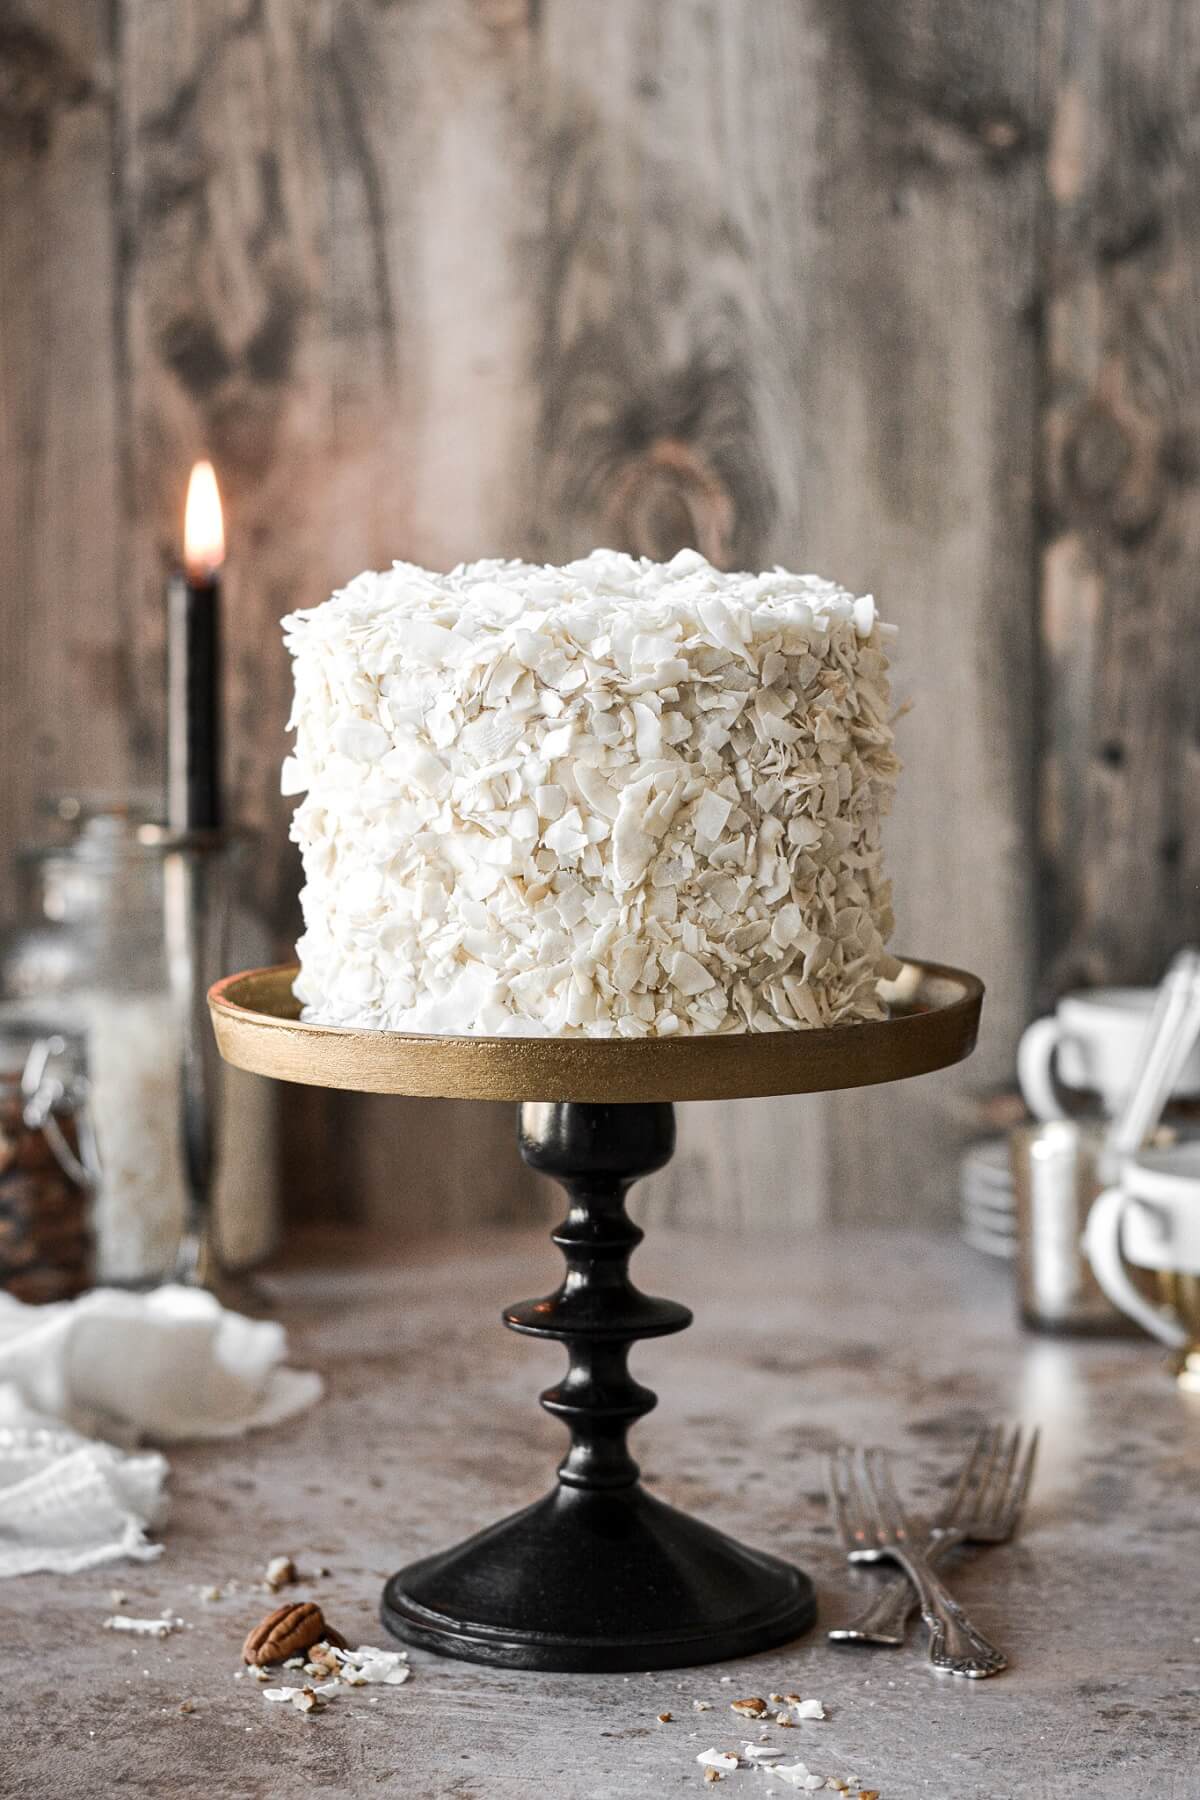 Italian cream cake covered in coconut on a black and bronze cake stand.